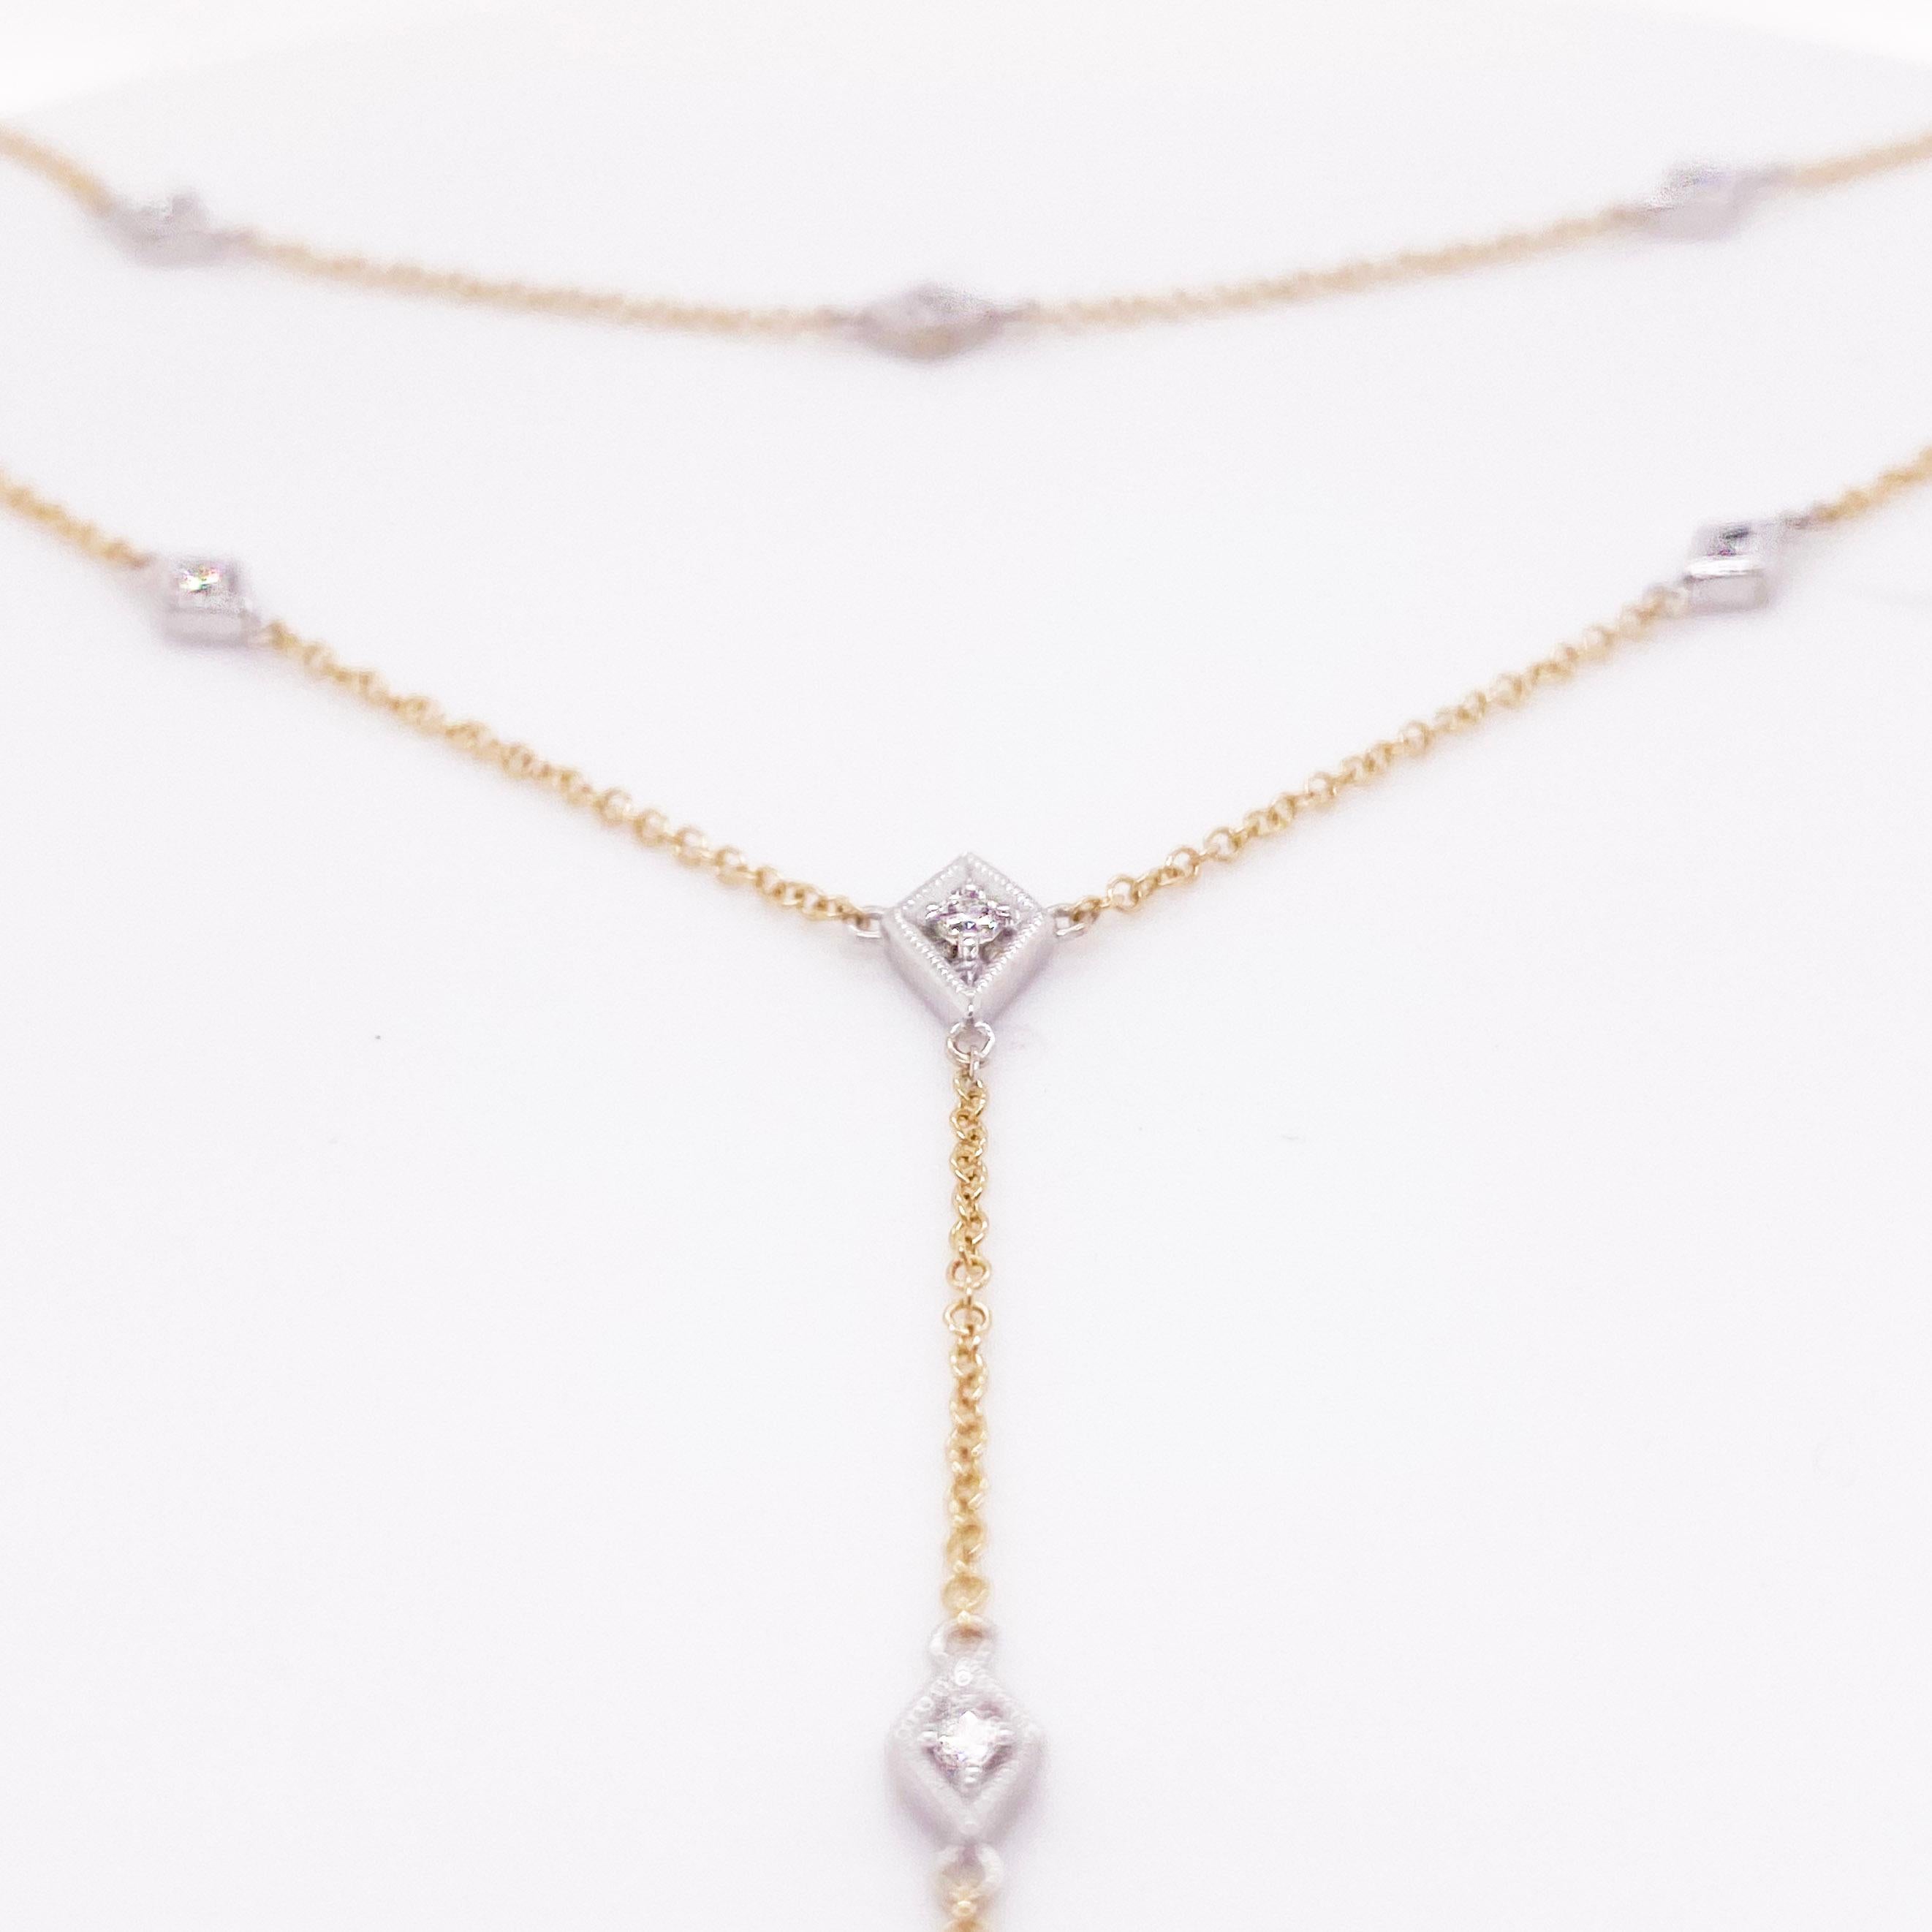 Show off your elegance with the beauty of this necklace. This piece looks stunning on any neck with two strands of 14 karat yellow gold with eye clean, round brilliant diamonds attached! The diamond shaped plate around the round brilliant diamonds